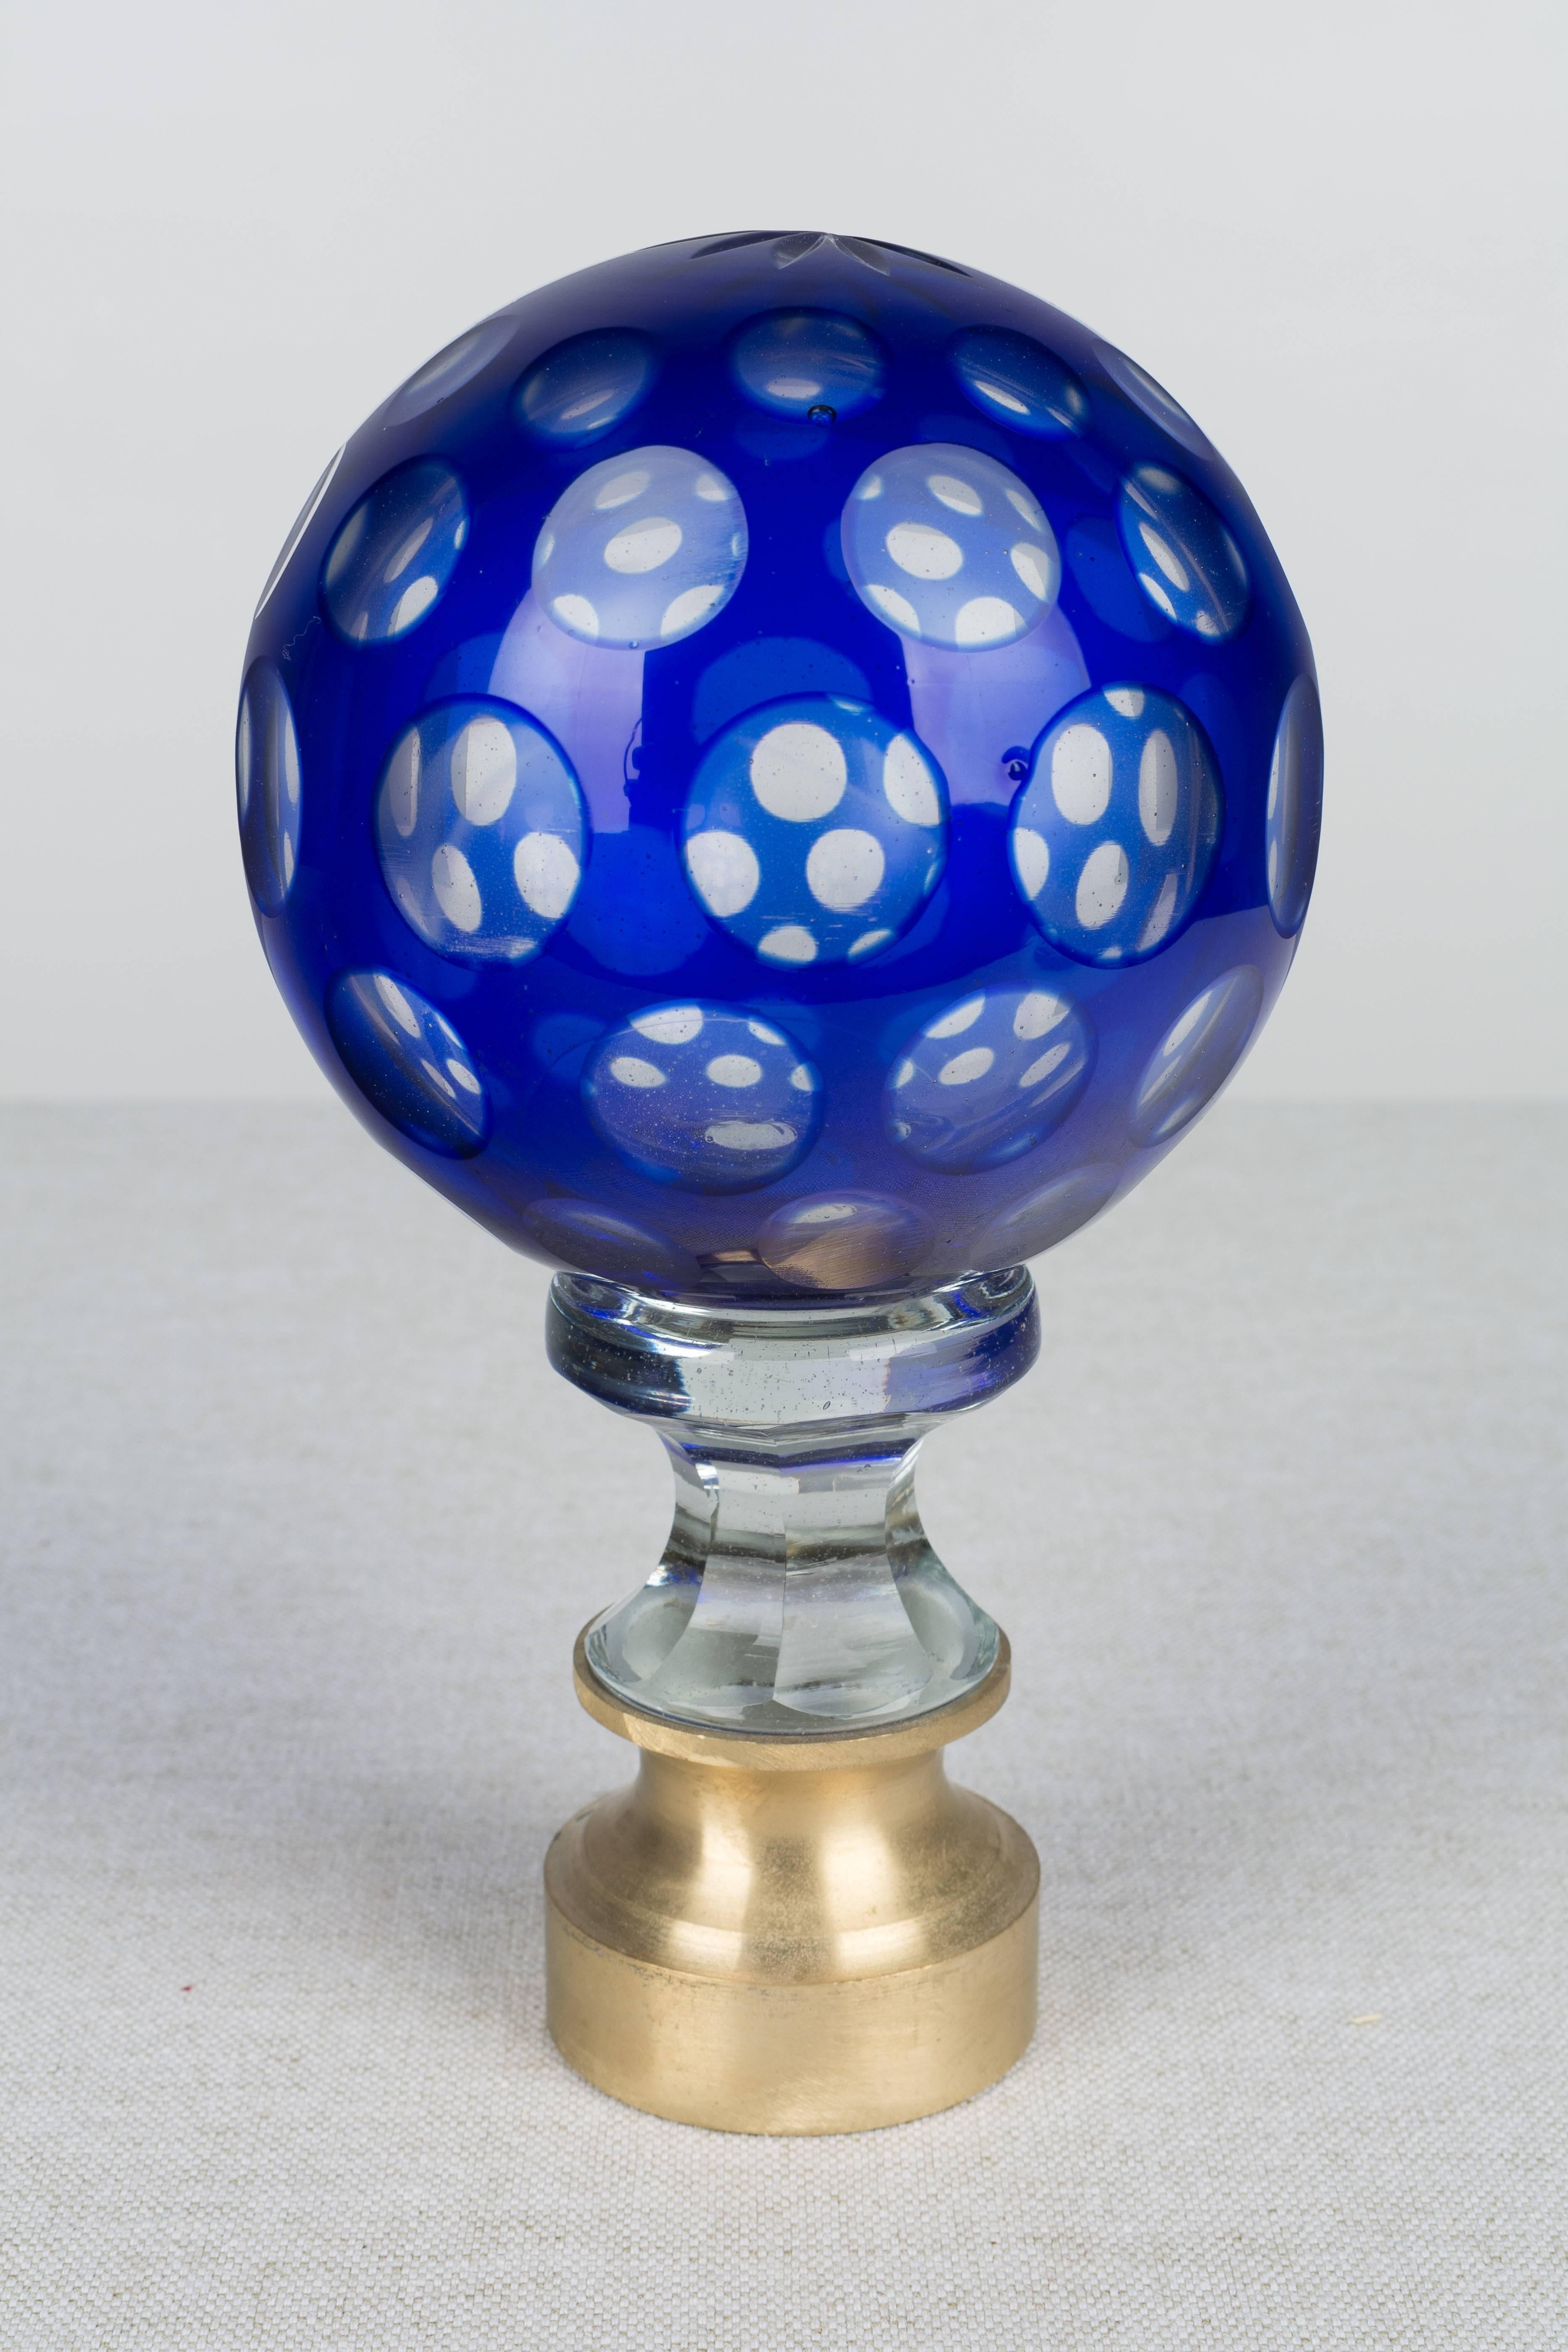 A 19th century French crystal newel post finial or boule d'escalier. These wonderful finials were used as decorative elements at the bottom of a staircase on the newel post. This one is made of two layers of cased glass with the cobalt glass surface